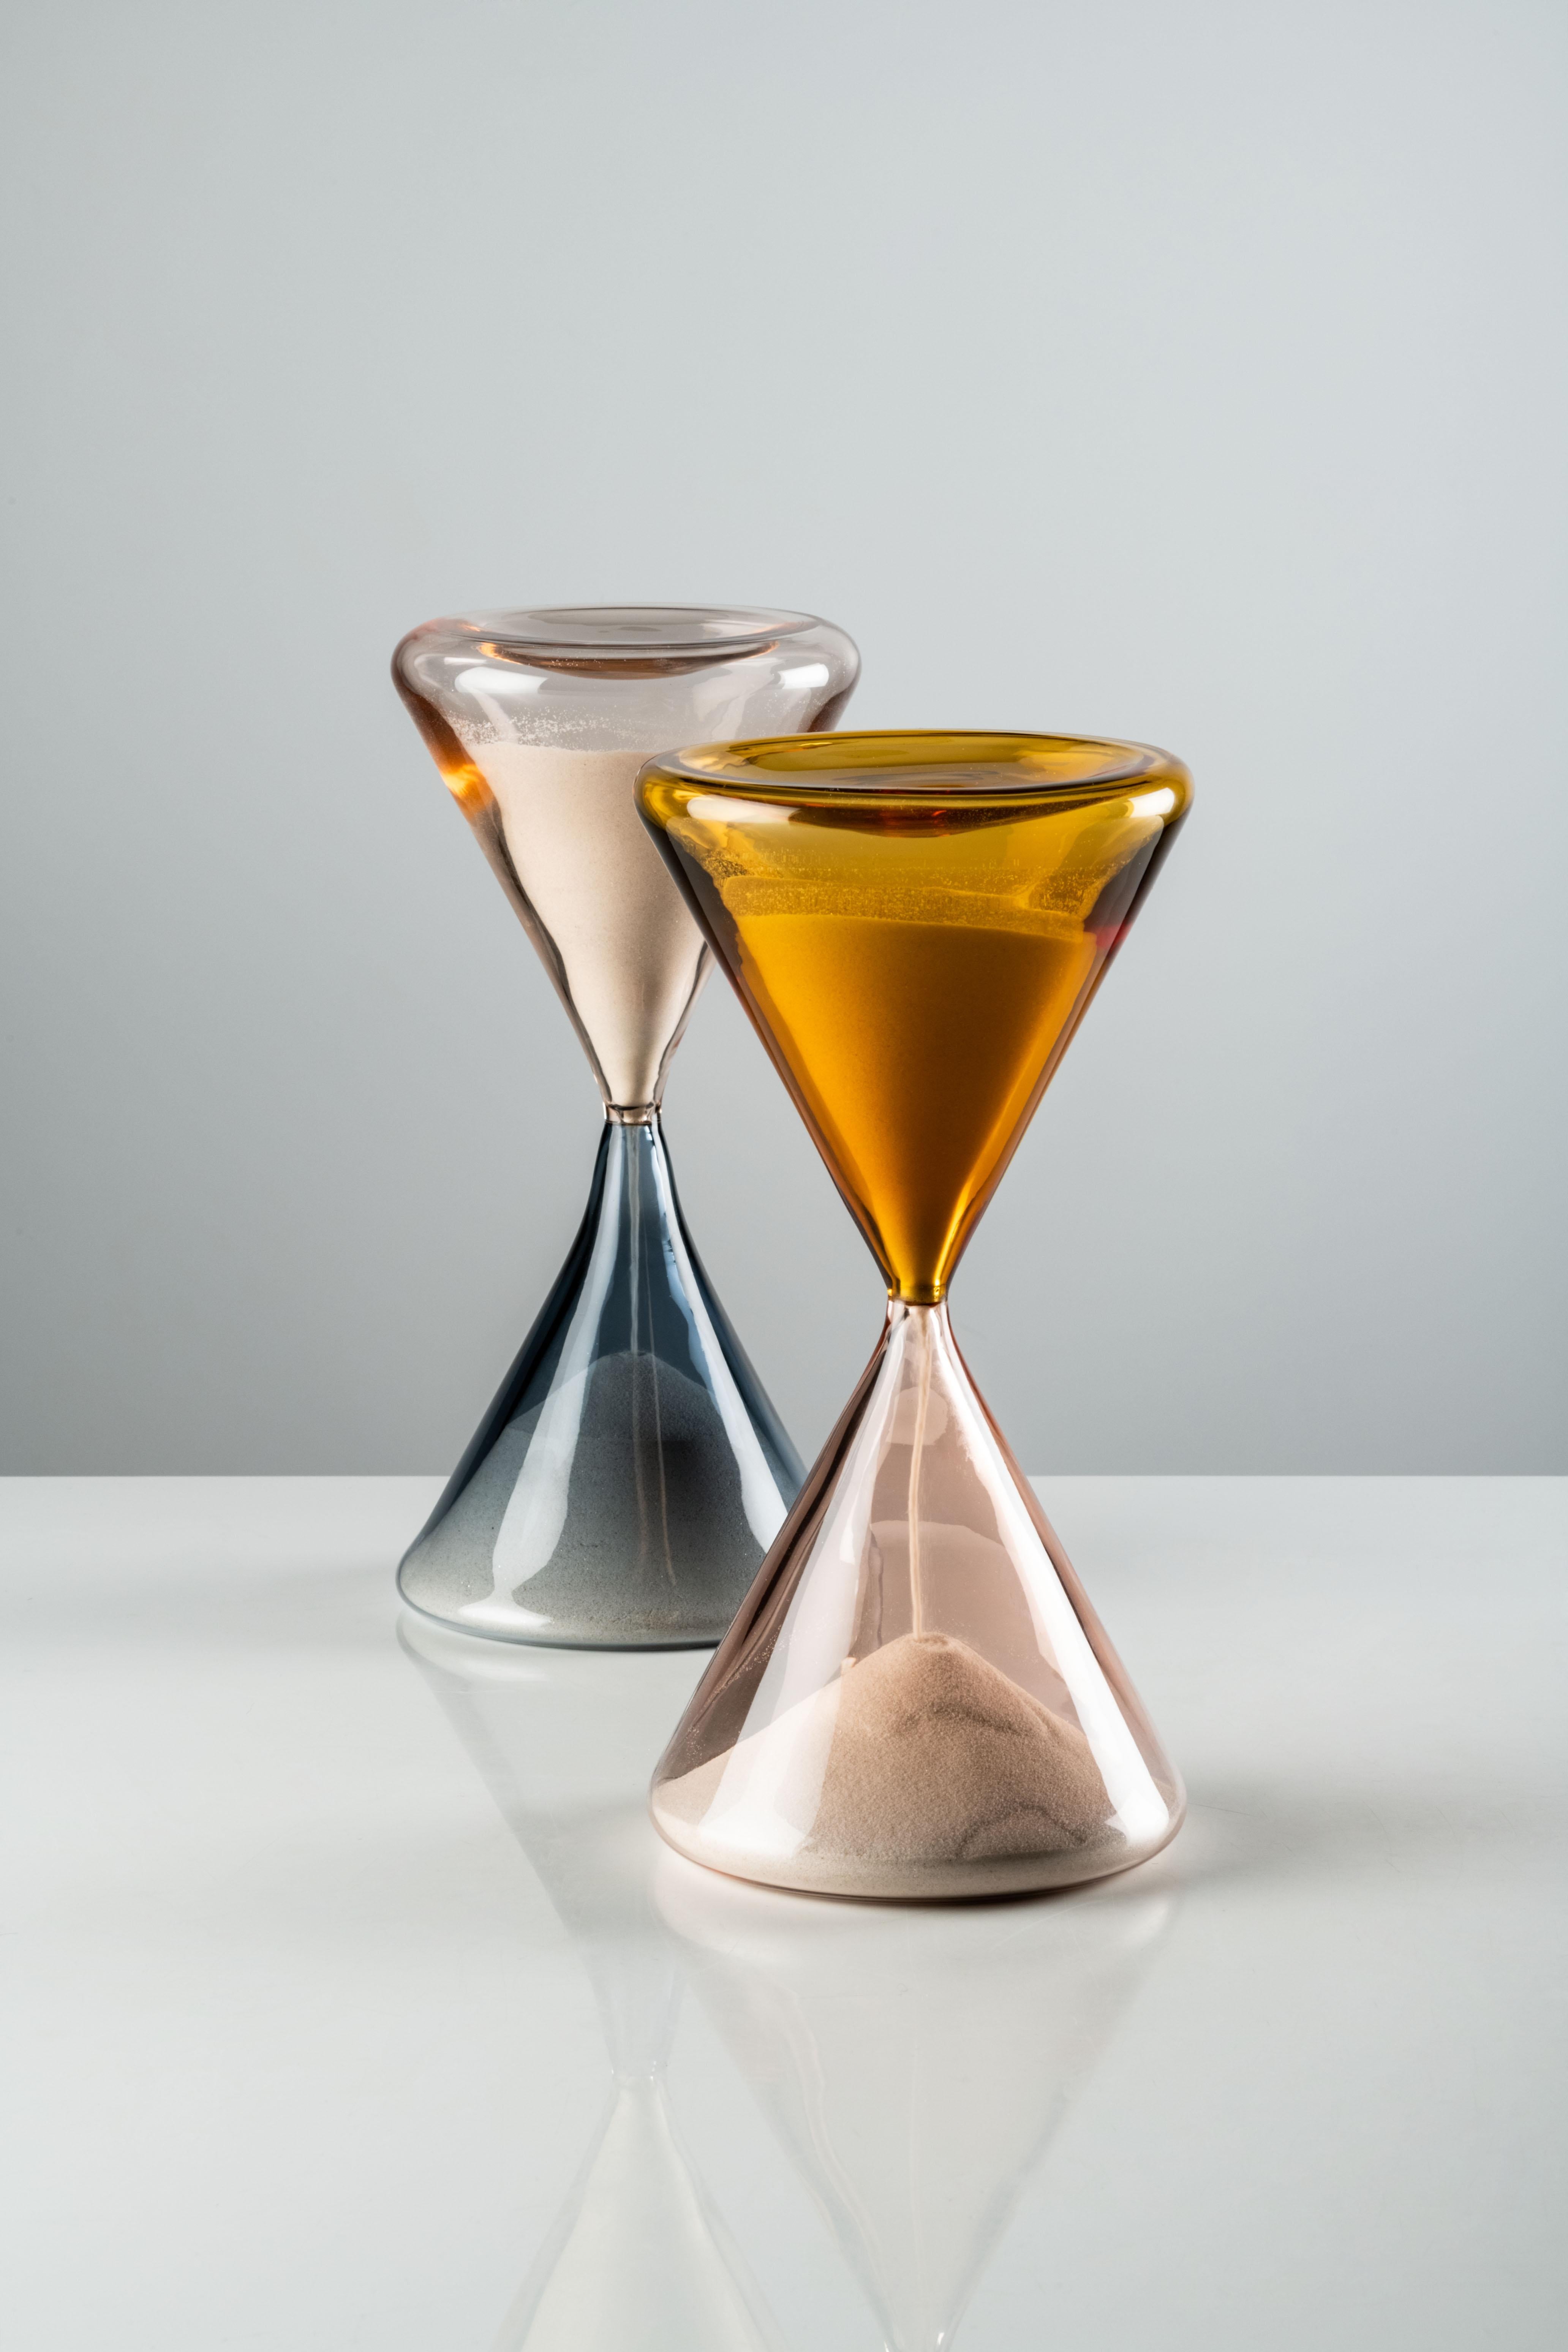 Clessidra hourglass in grape and pink Murano glass by Paolo Venini and Riedizione. Limited edition in 99 art pieces each. Little grains of sand, impalpable and unnoticeable as a whole yet so real, like time ticking away. In 1957, Fulvio Bianconi and